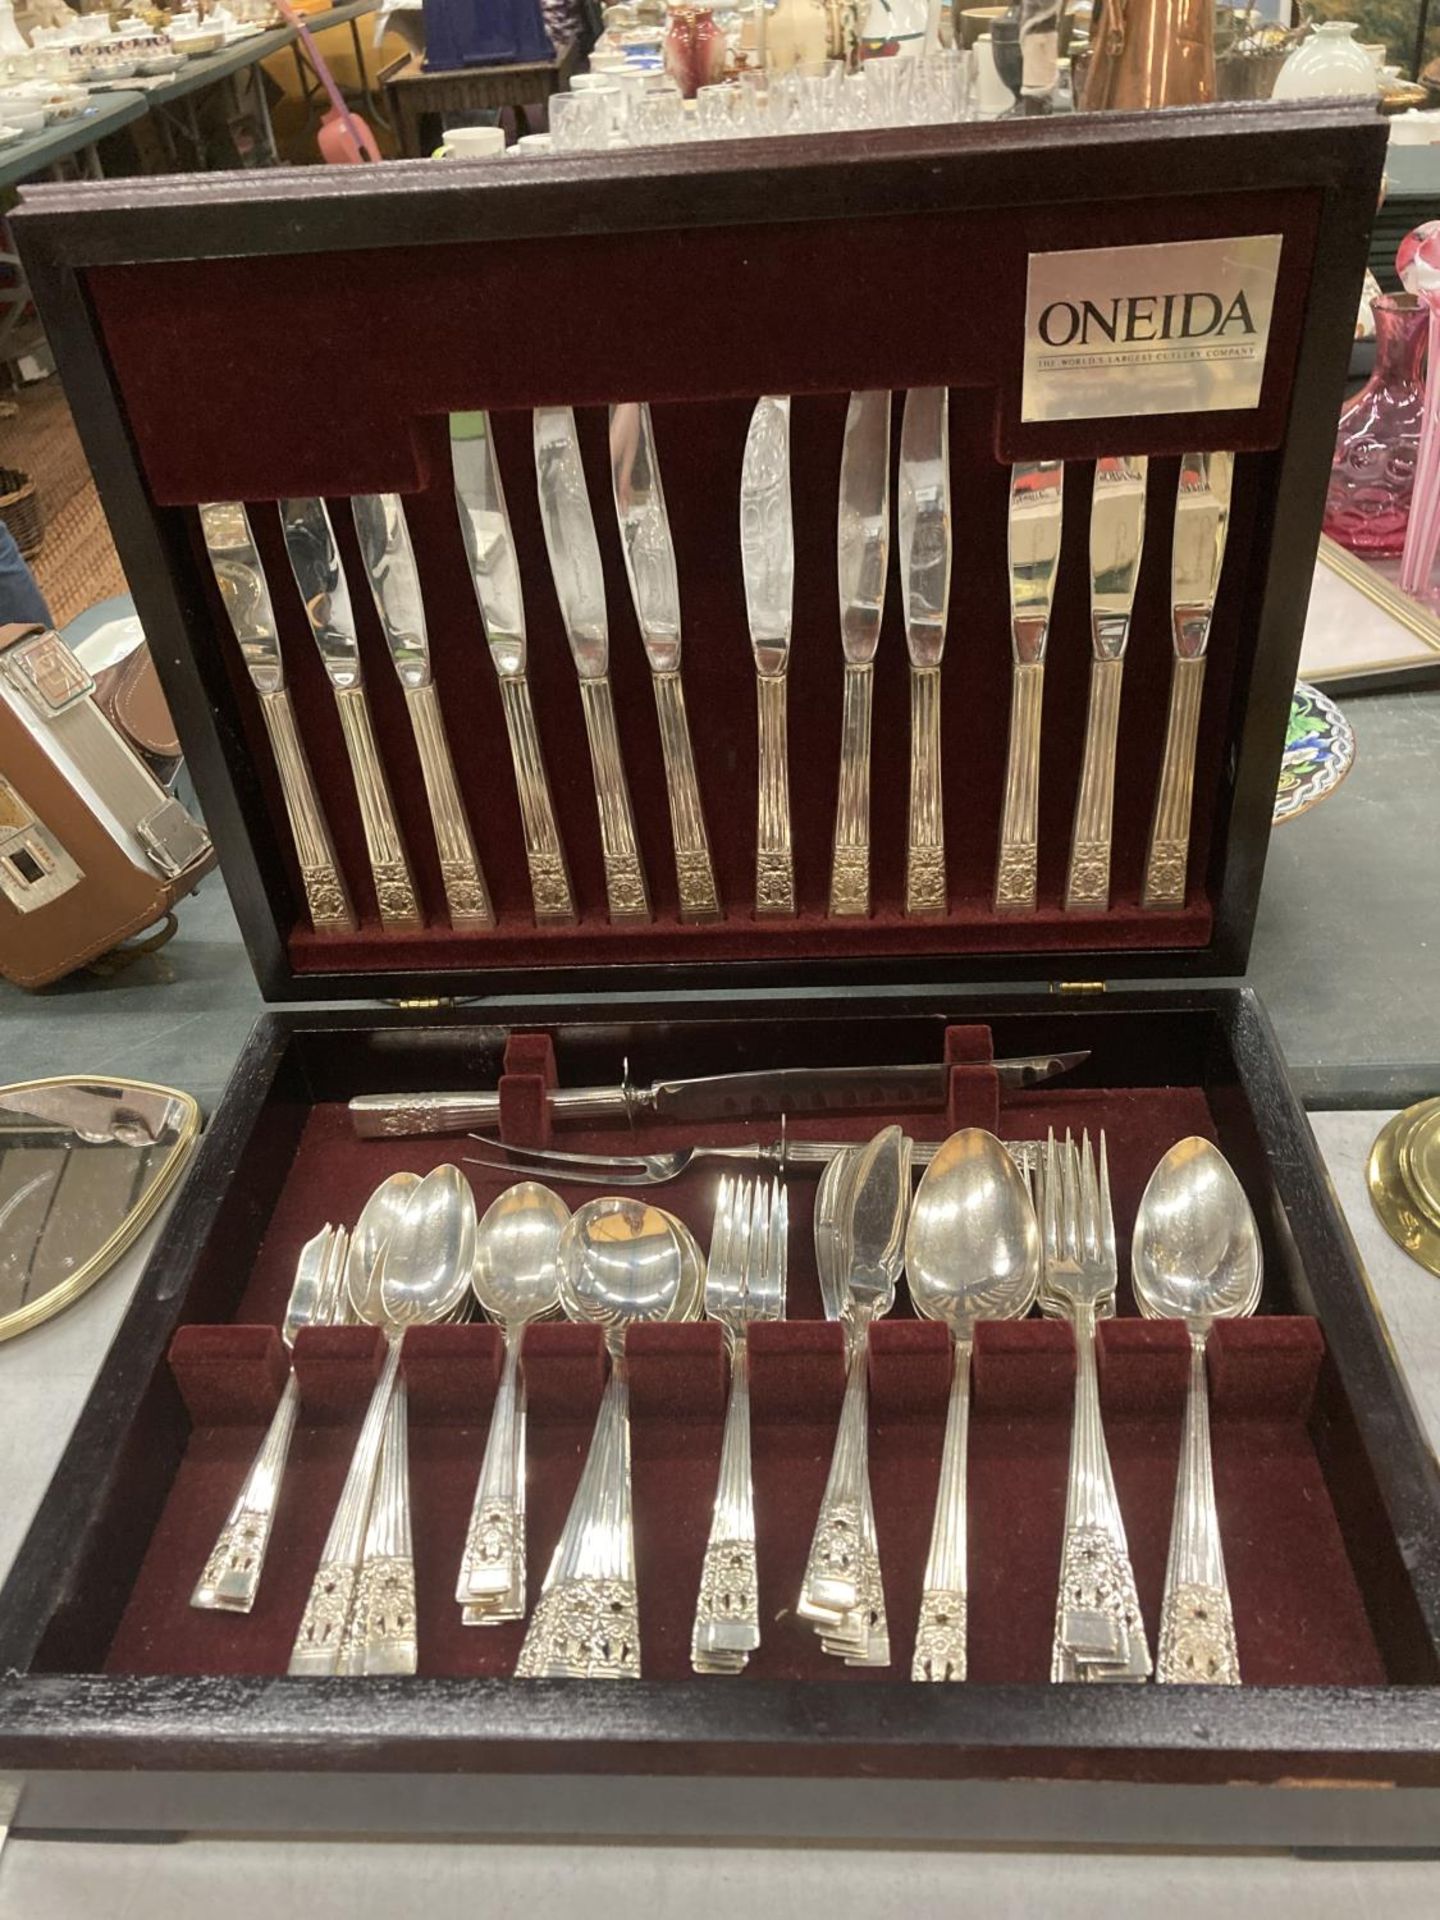 AN ONEIDA SIXTY PIECE CANTEEN OF CULTLERY IN A MAHOGMANY CASE